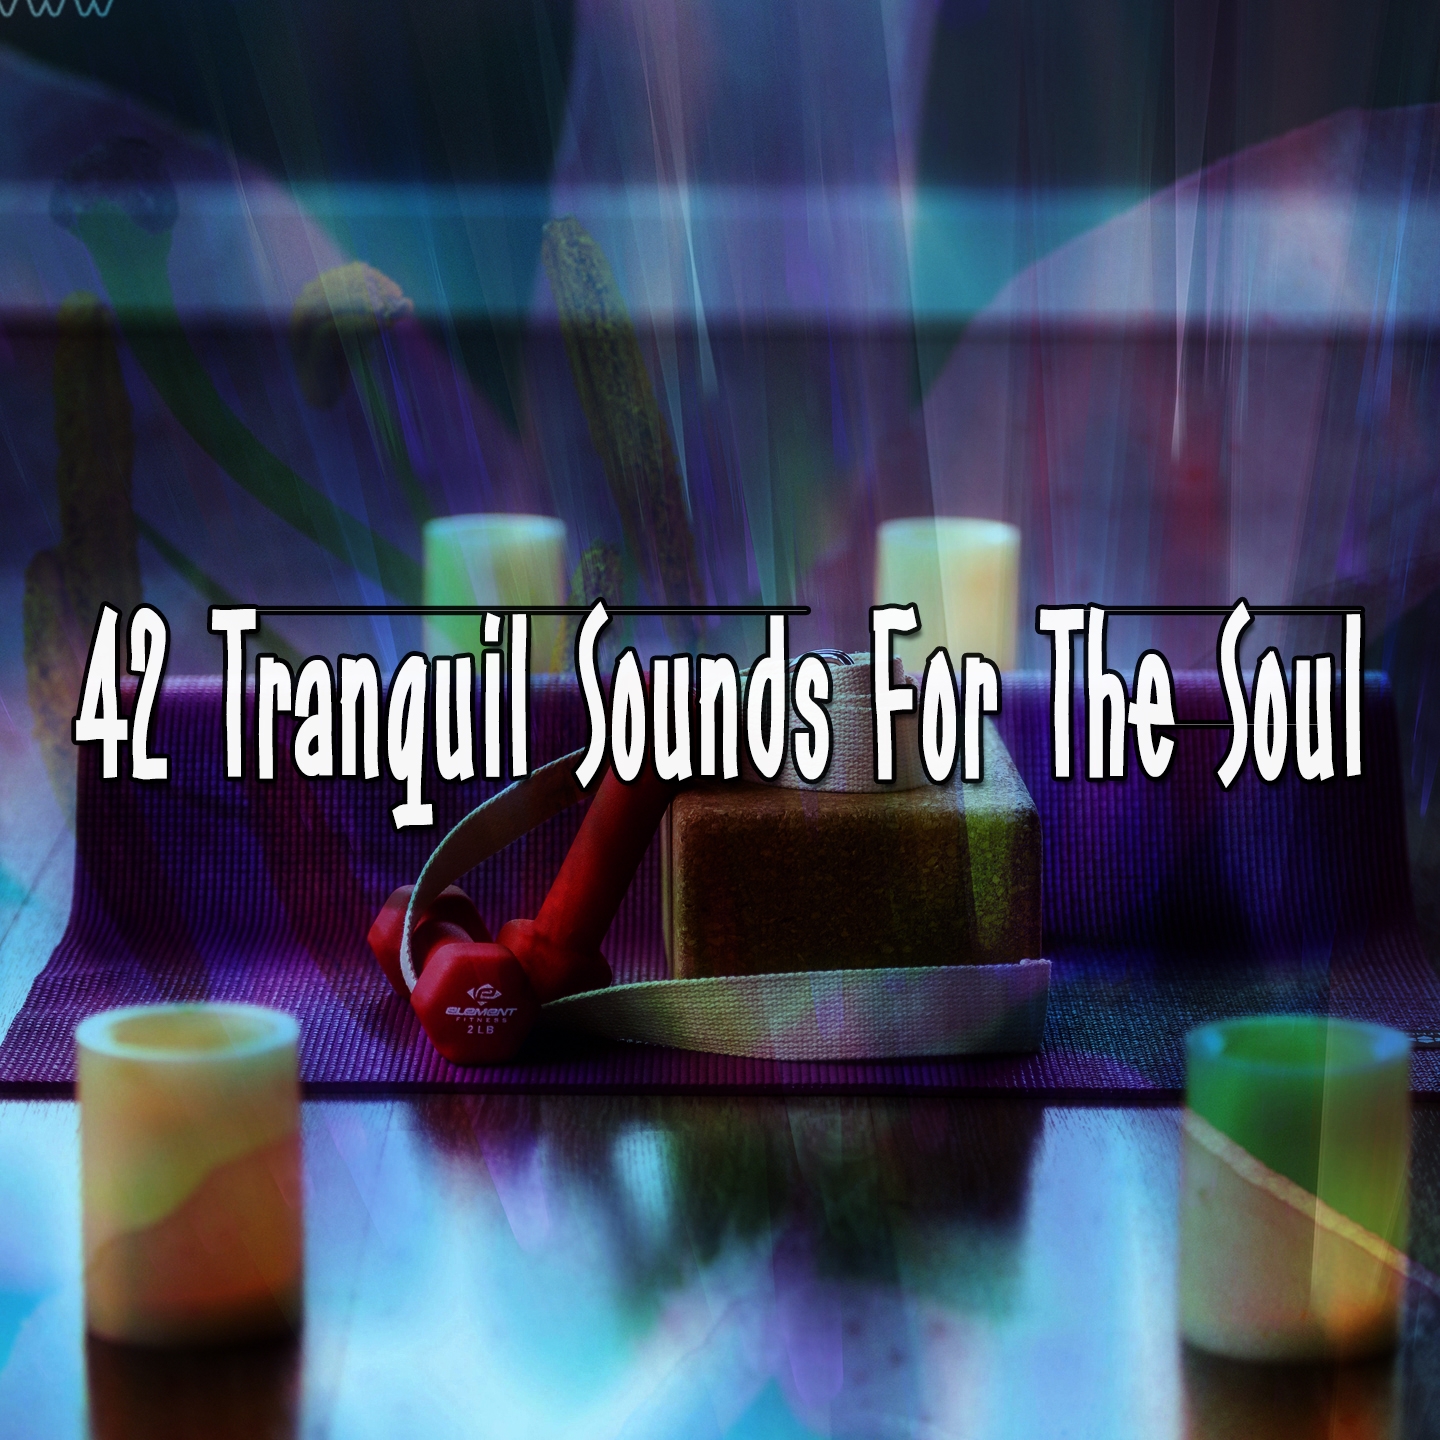 42 Tranquil Sounds For The Soul